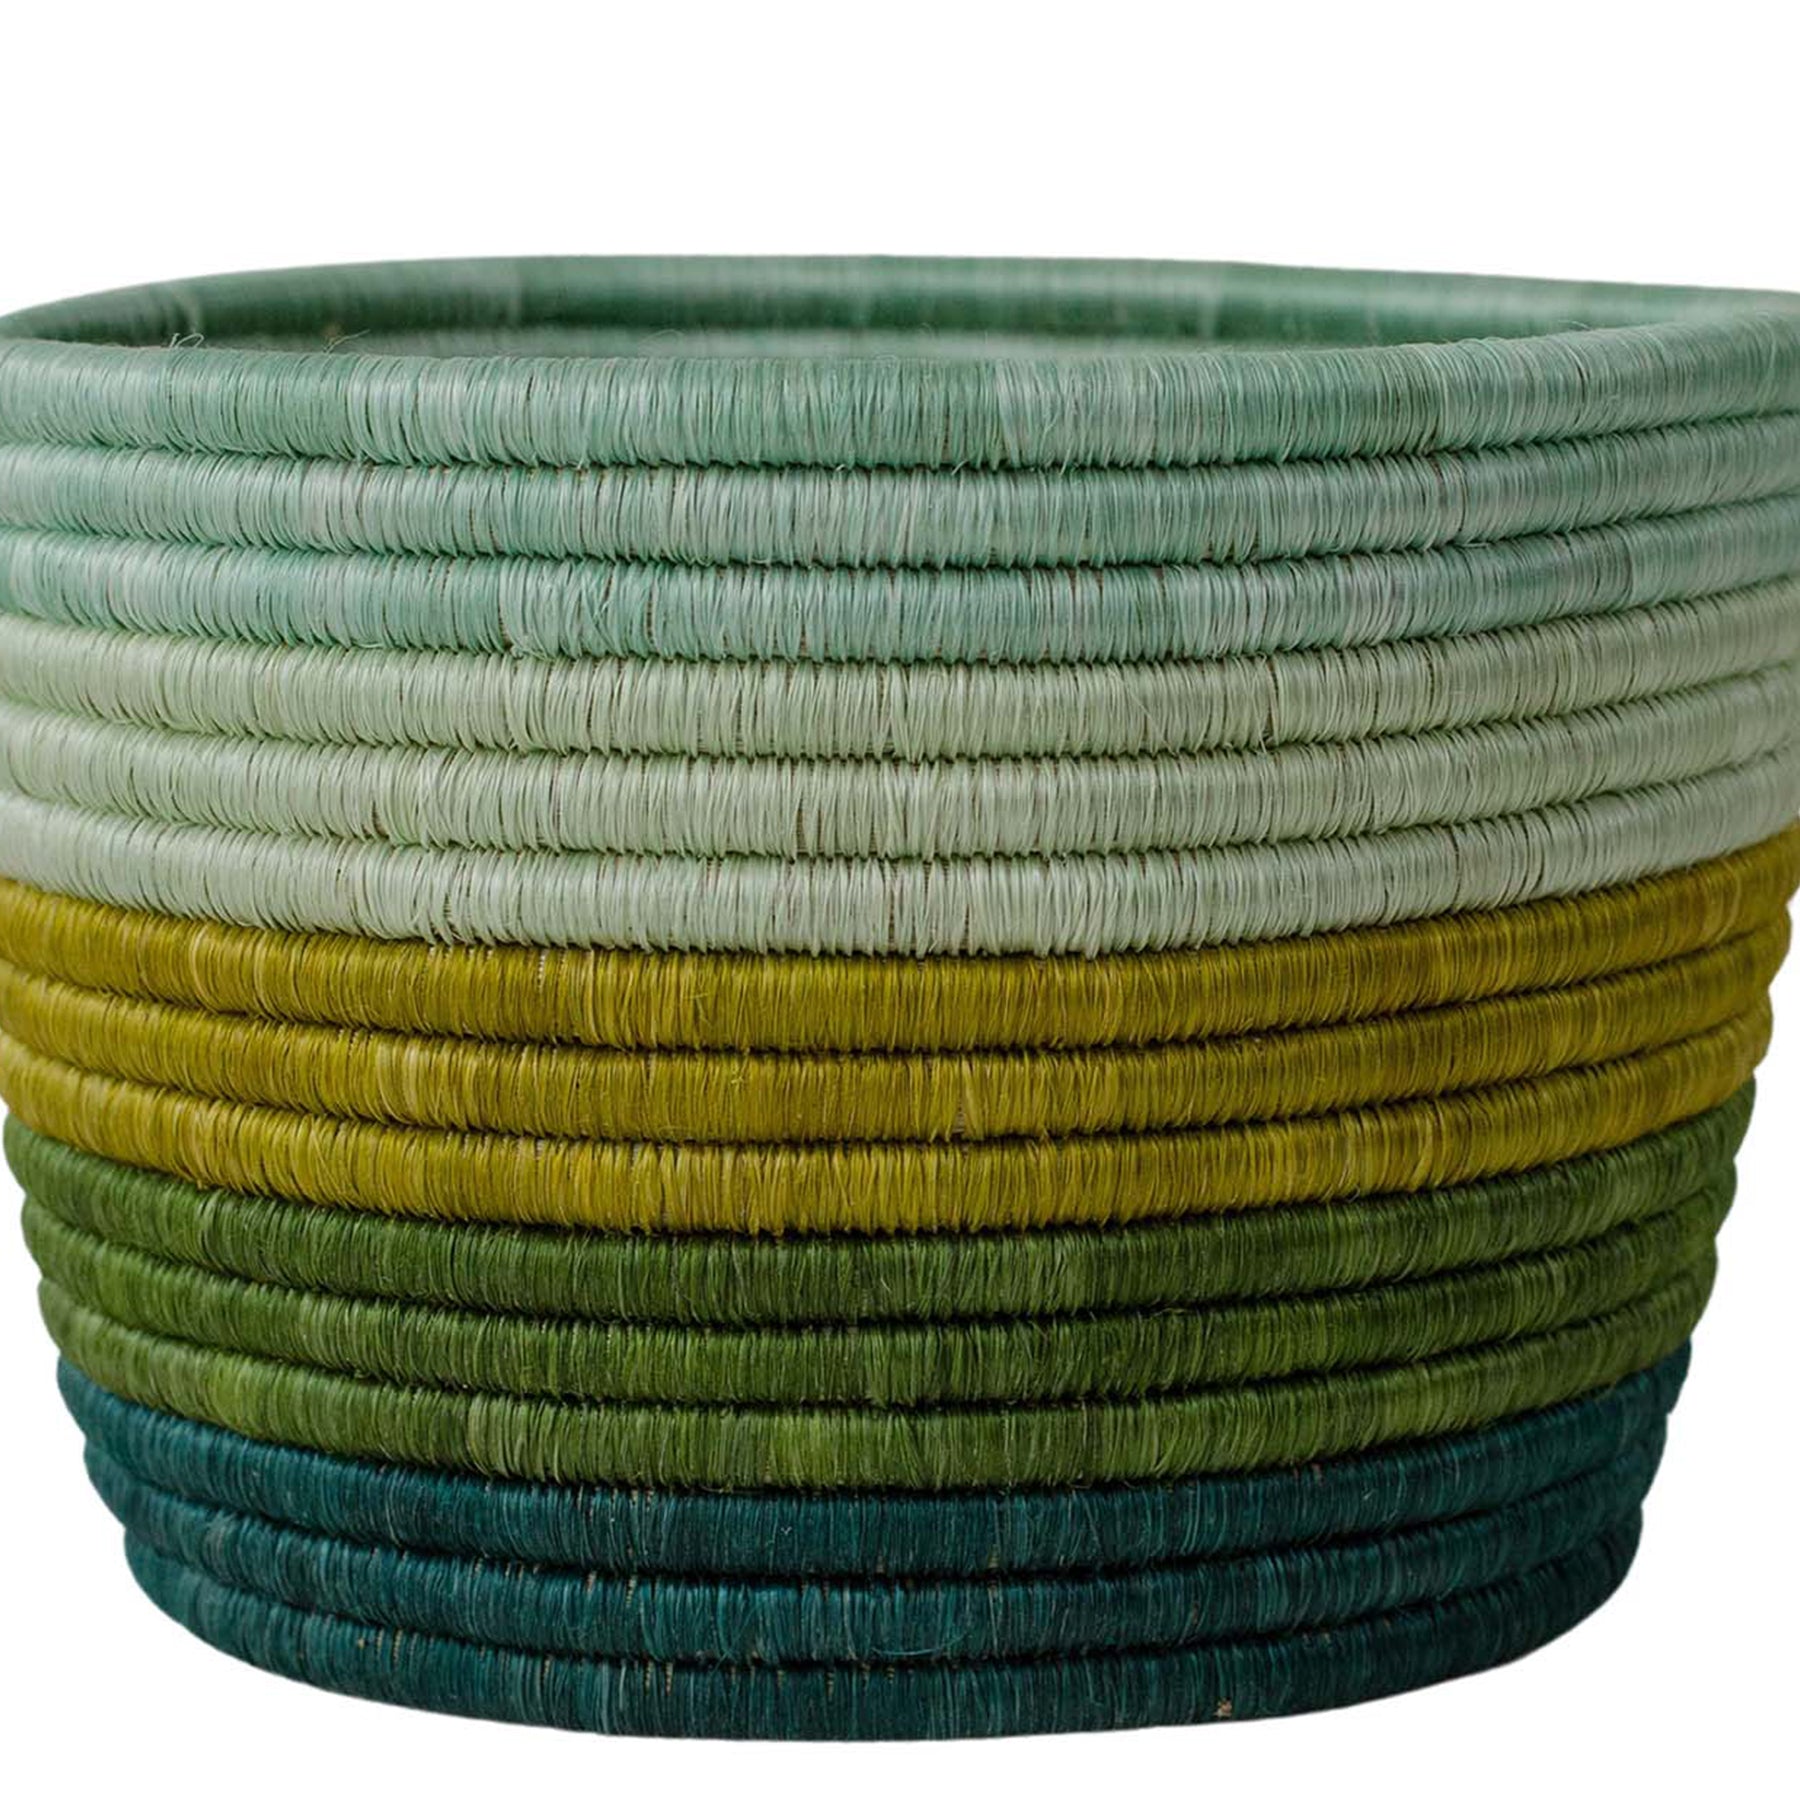 7" Shades of Green Striped Tapered Planter